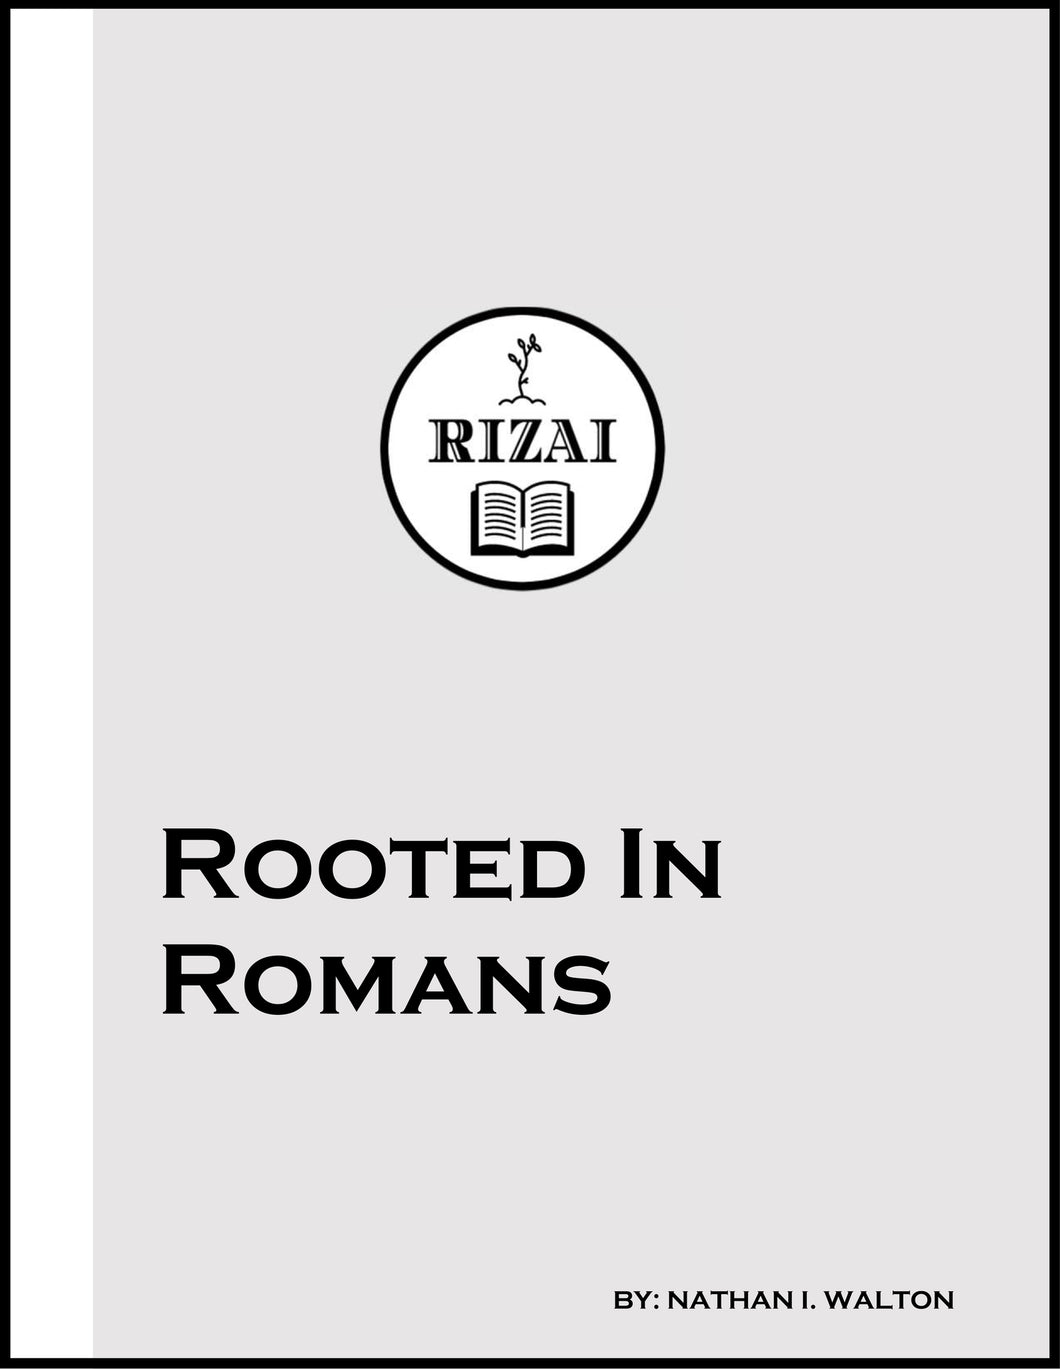 Rooted in Romans (6-Part)